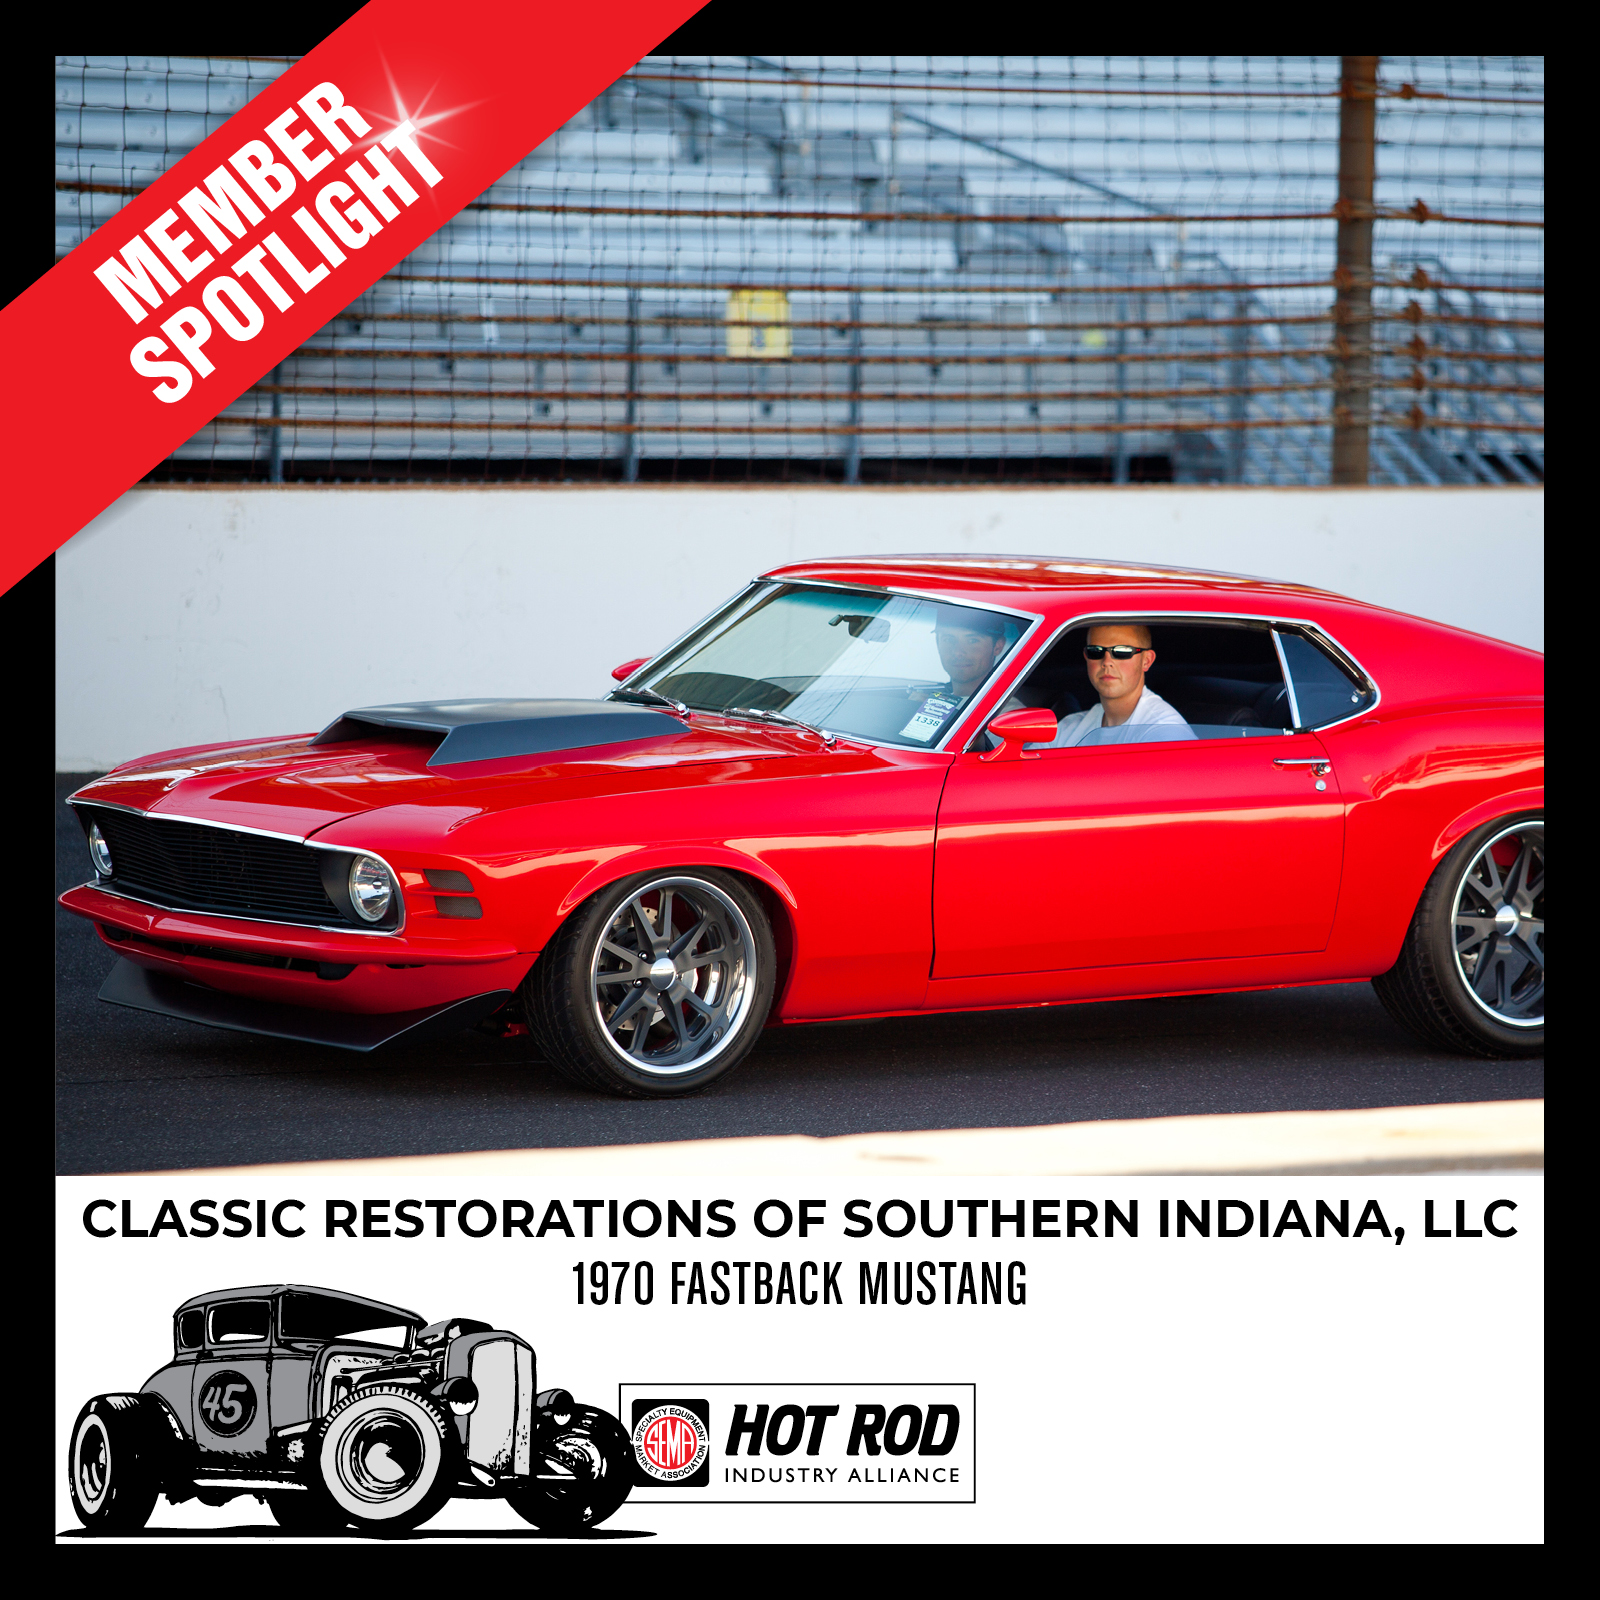 HRIA Member Spotlight - Classic Restorations of Southern Indiana